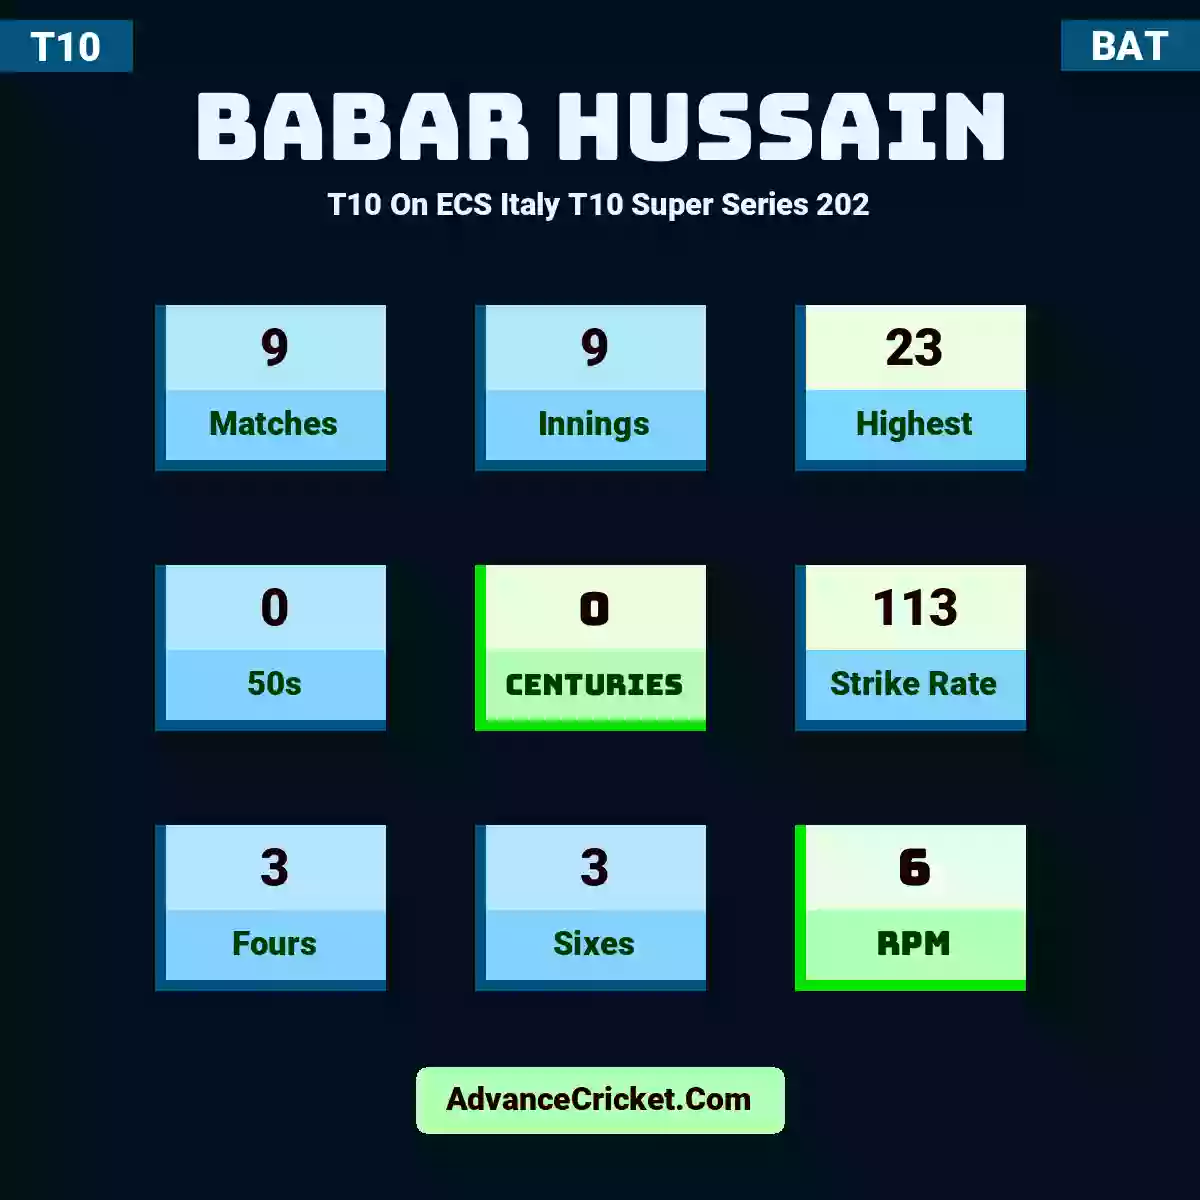 Babar Hussain T10  On ECS Italy T10 Super Series 202, Babar Hussain played 9 matches, scored 23 runs as highest, 0 half-centuries, and 0 centuries, with a strike rate of 113. b.hussain hit 3 fours and 3 sixes, with an RPM of 6.